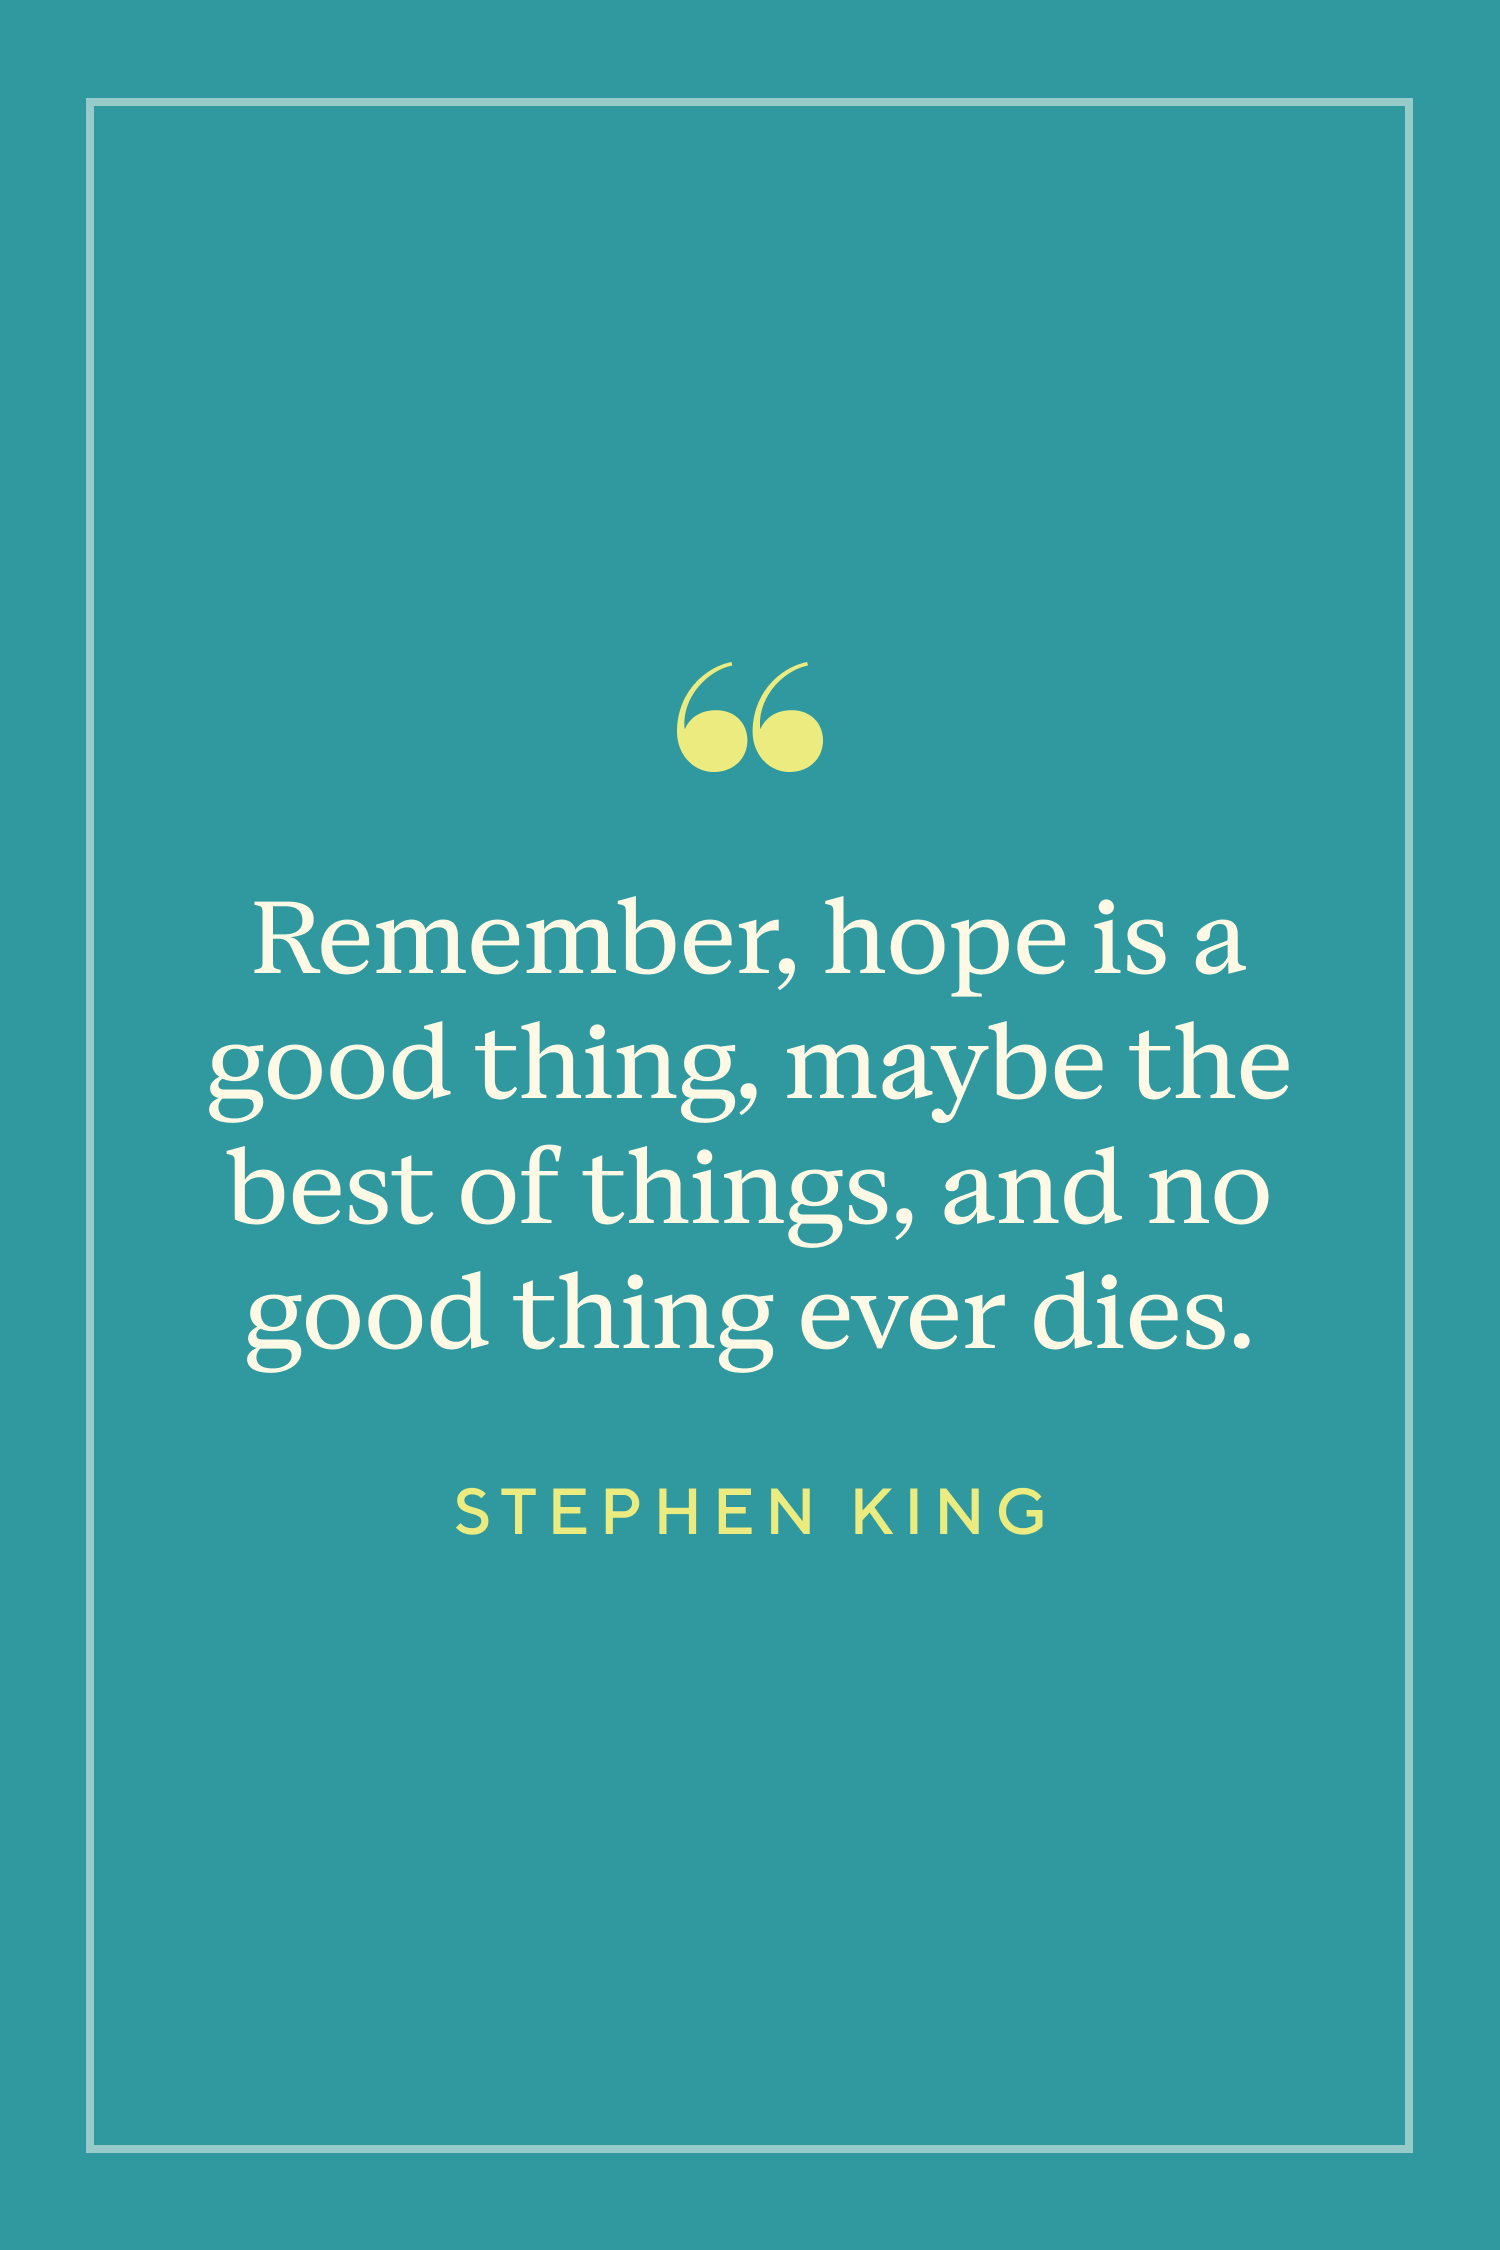 shawshank redemption quotes hope is a good thing